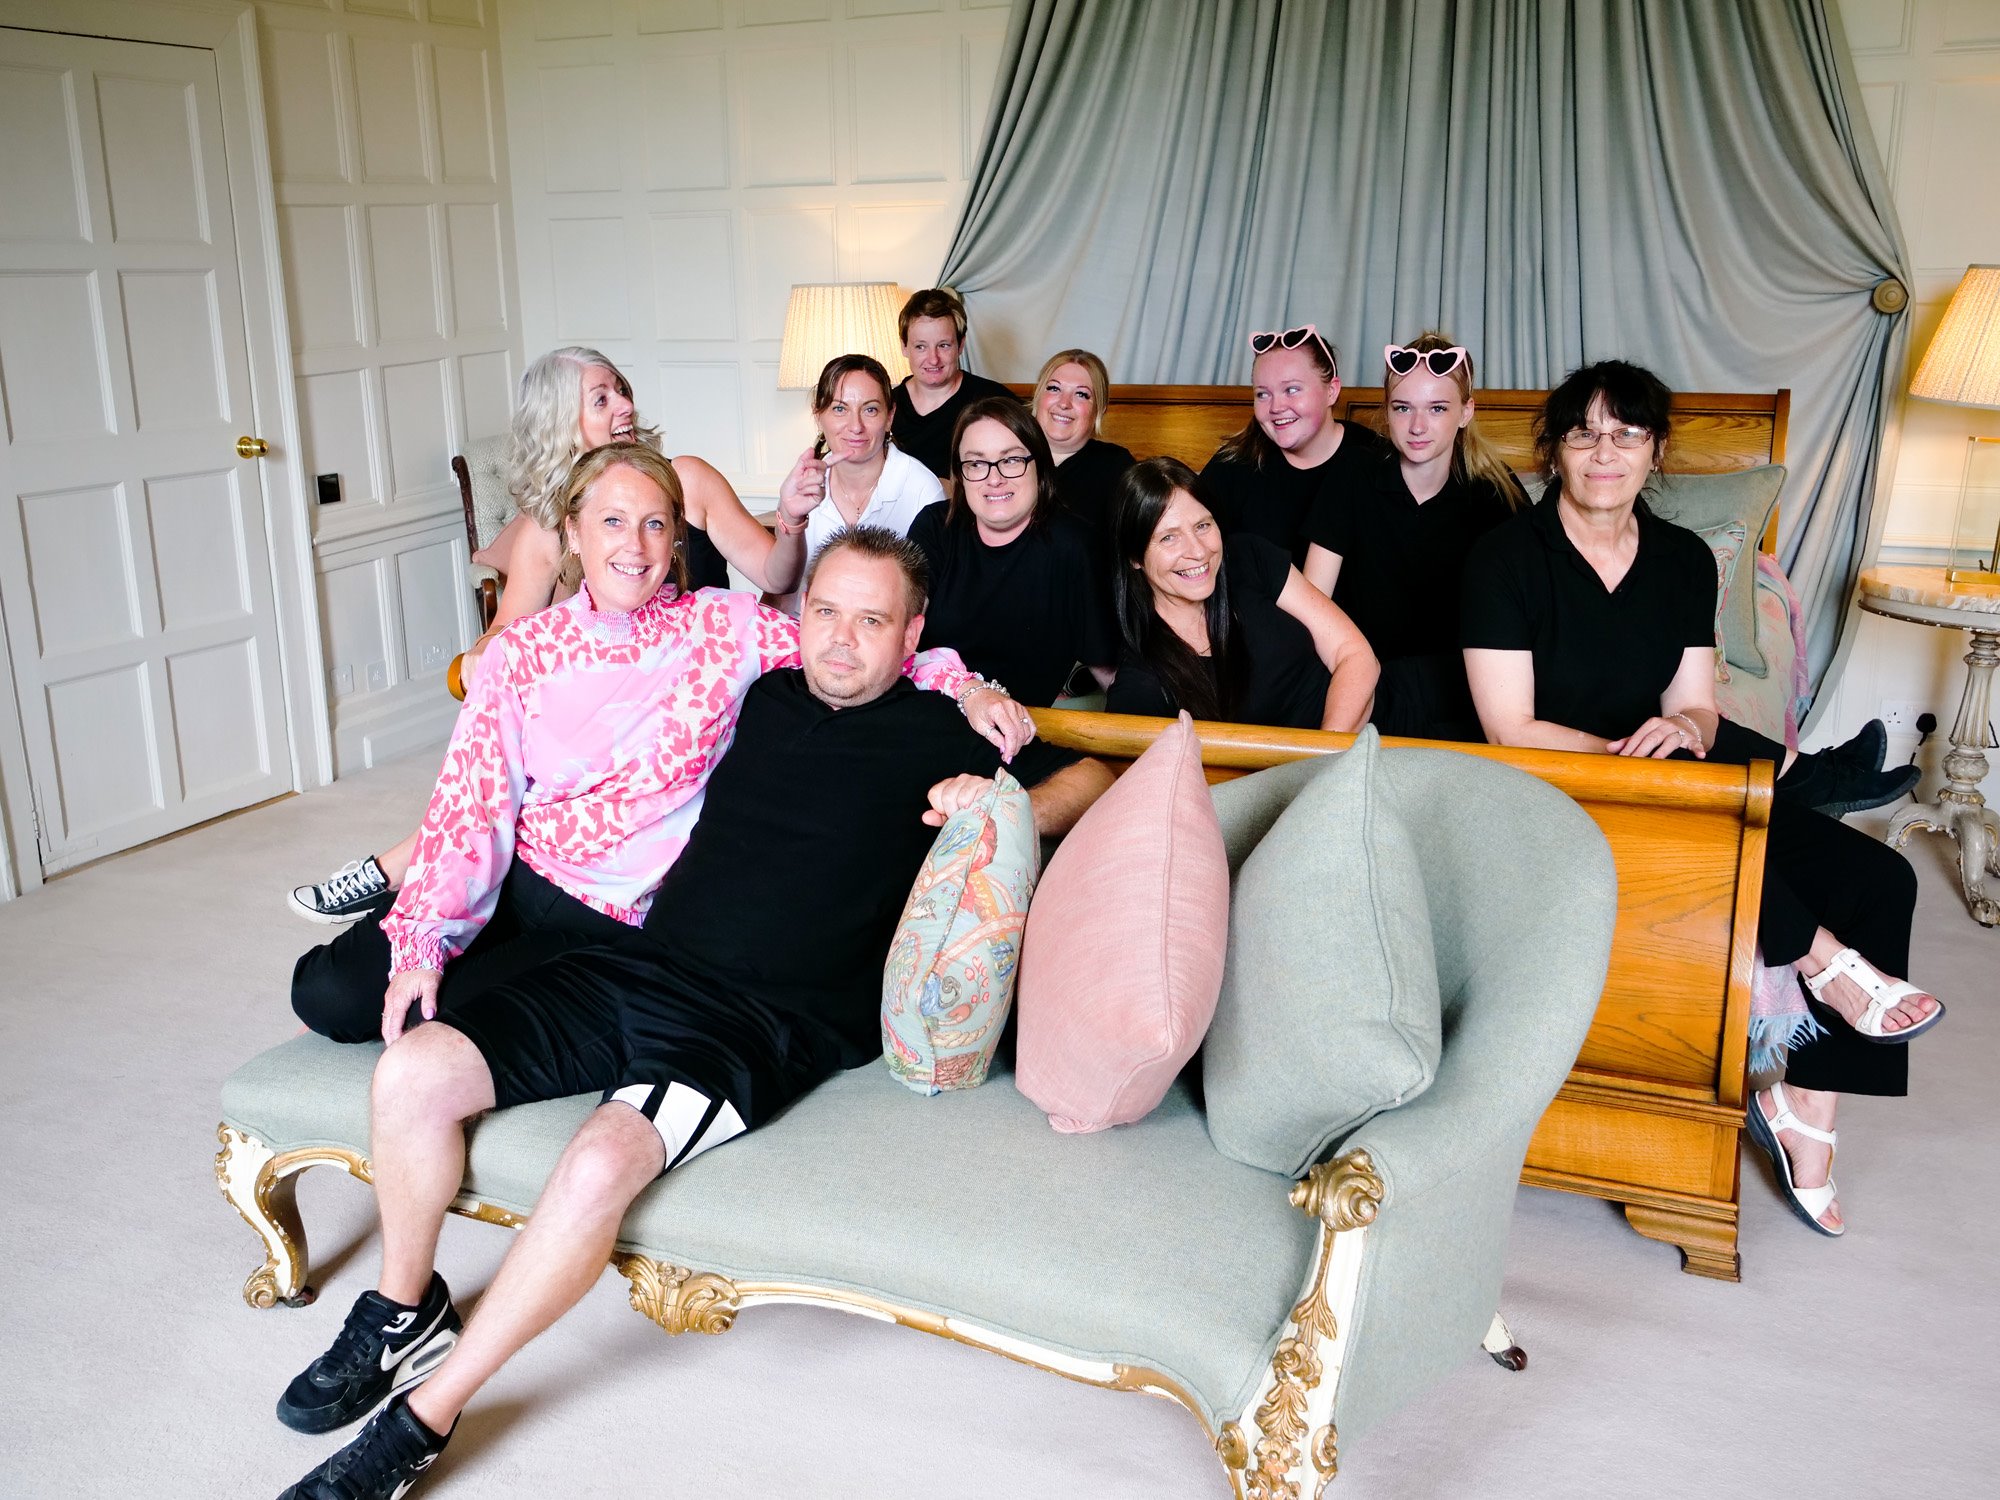 Housekeeping team of mansion house wedding venue Elmore court in the smoking room showing just how huge that emperor size bed is